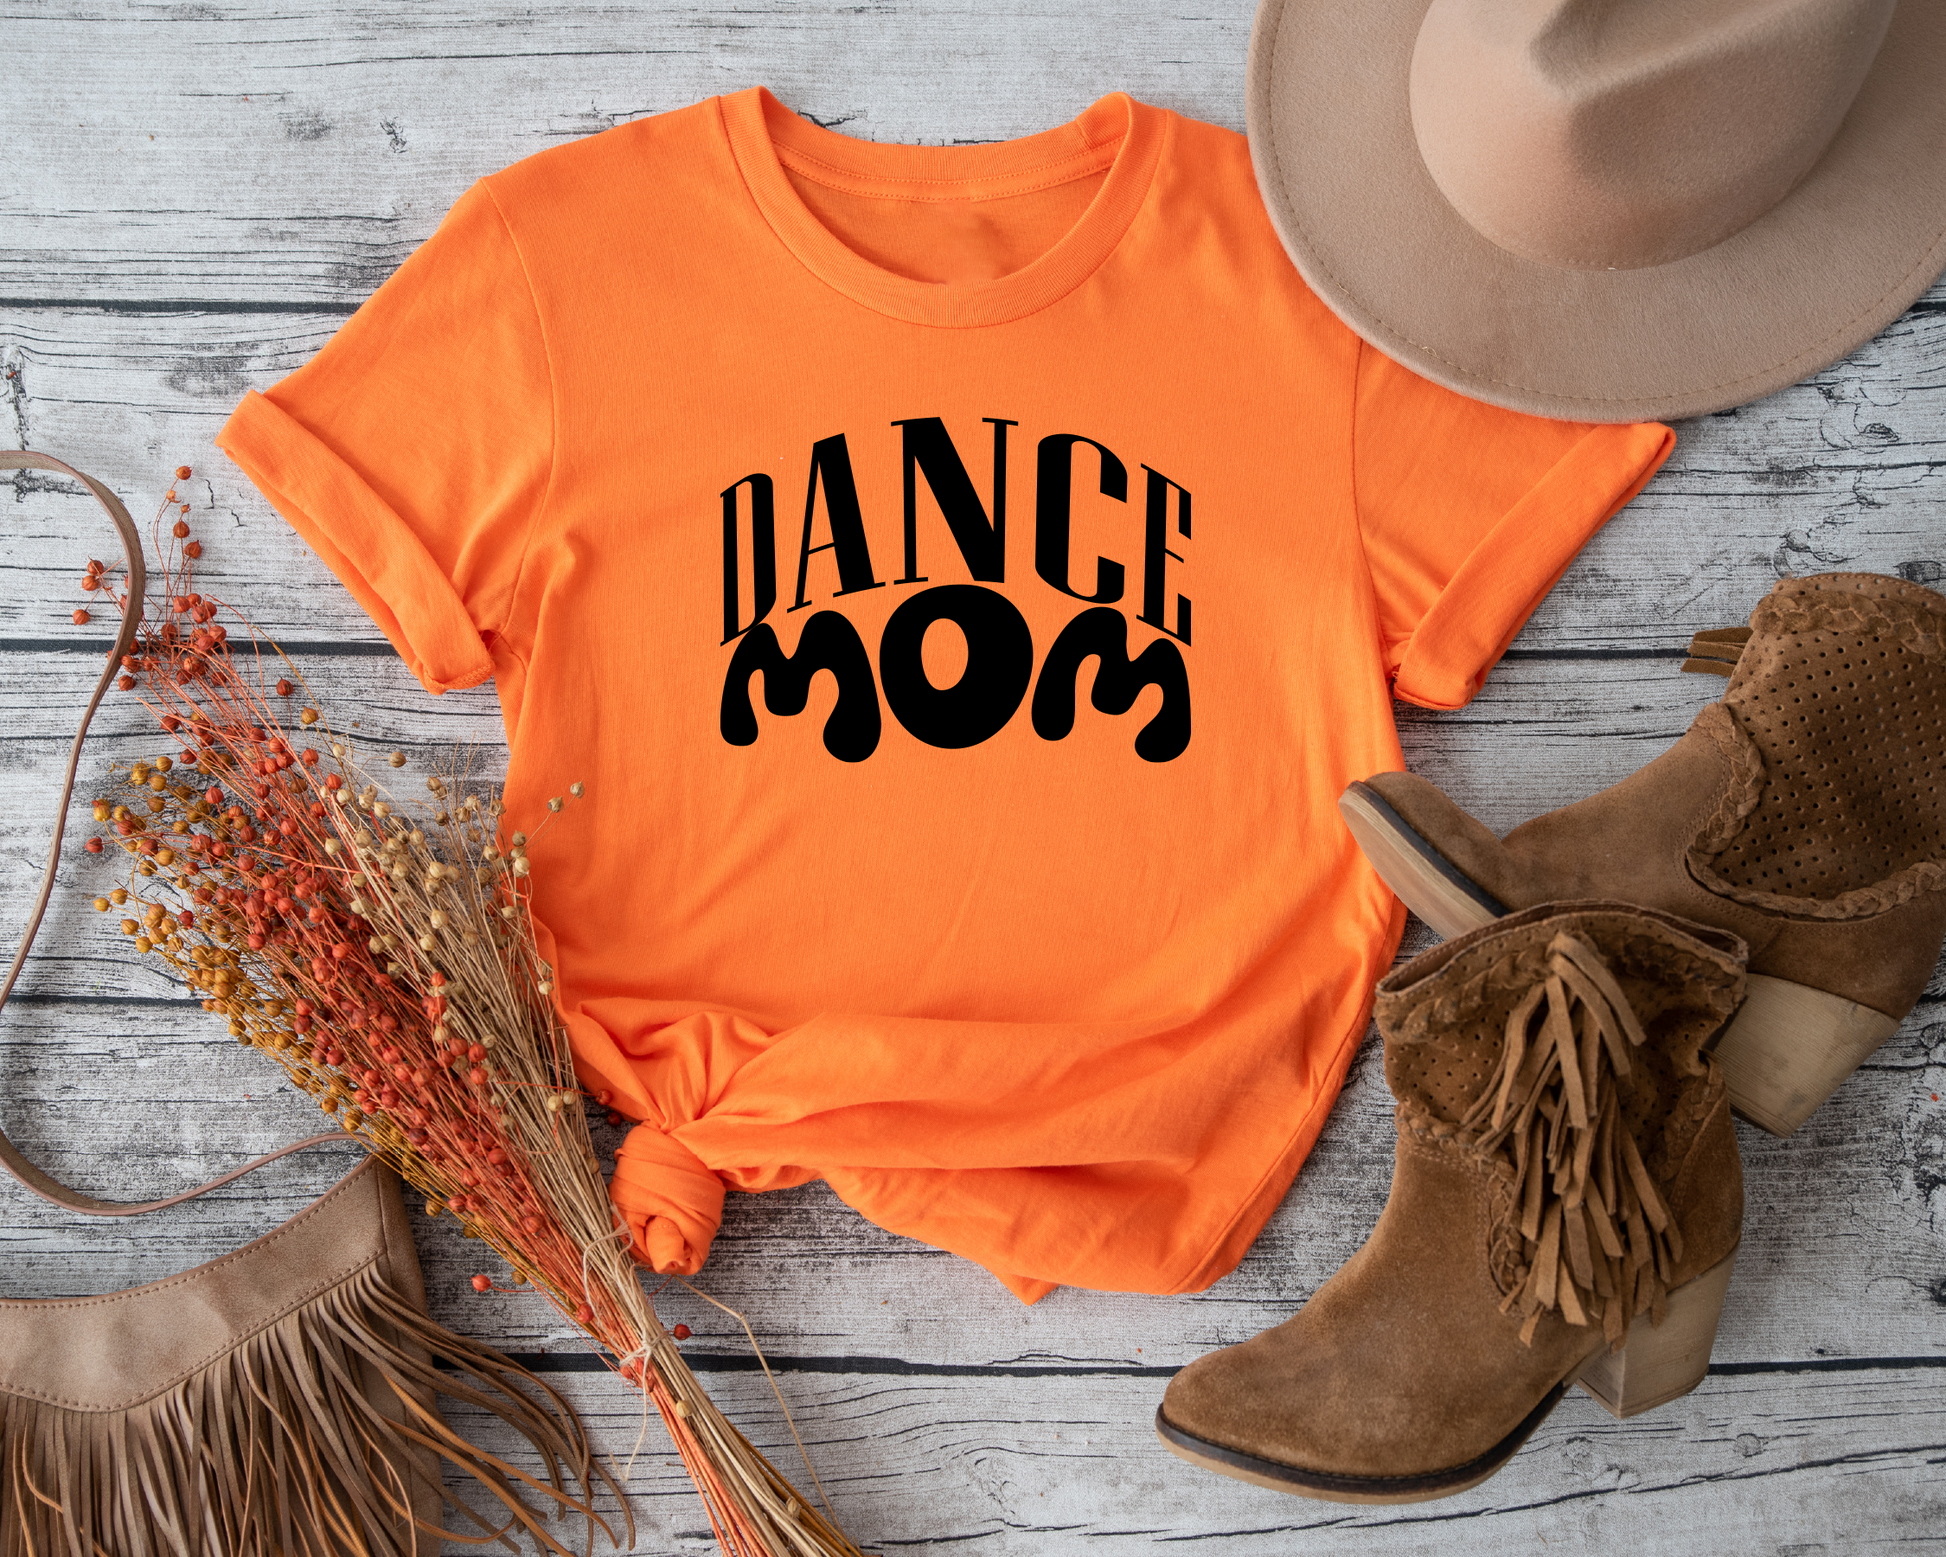 "Shirt showcasing the pride and enthusiasm of dance moms who support their children's passion."